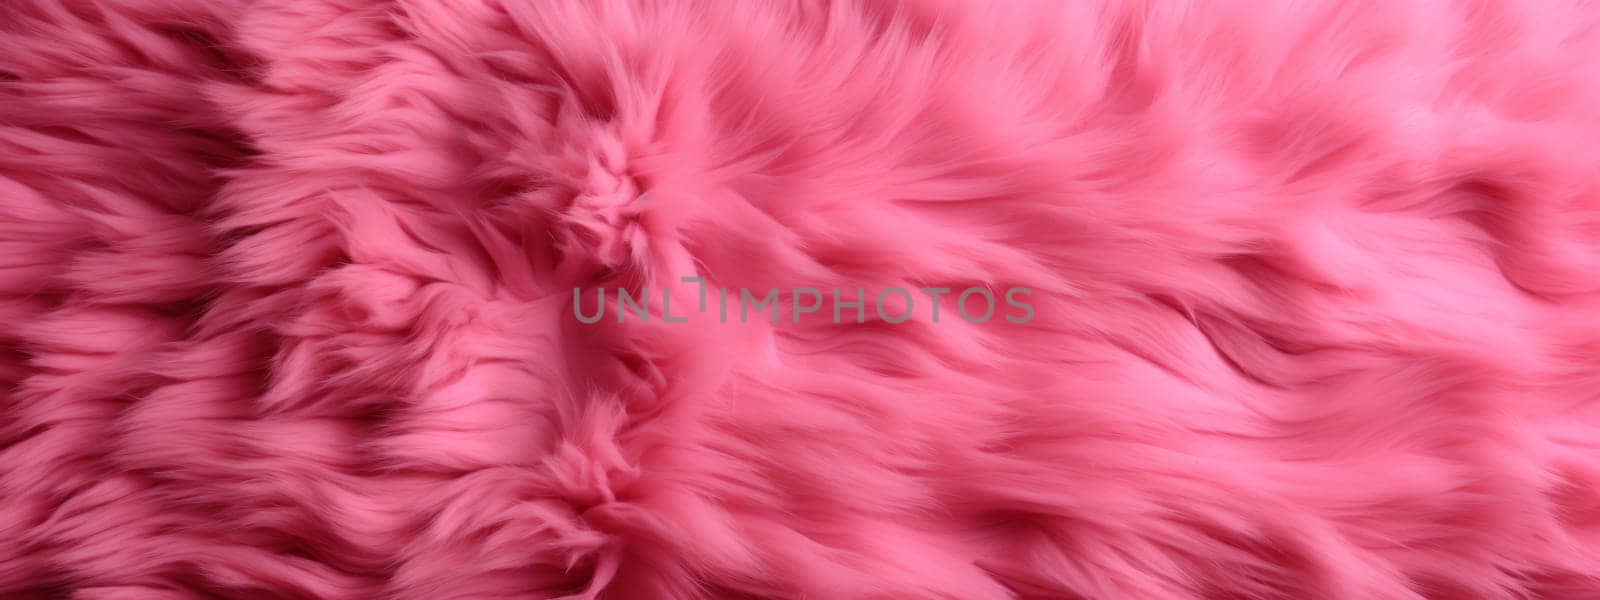 Pink fur texture top view. Coral fluffy fabric coat background. by Artsiom